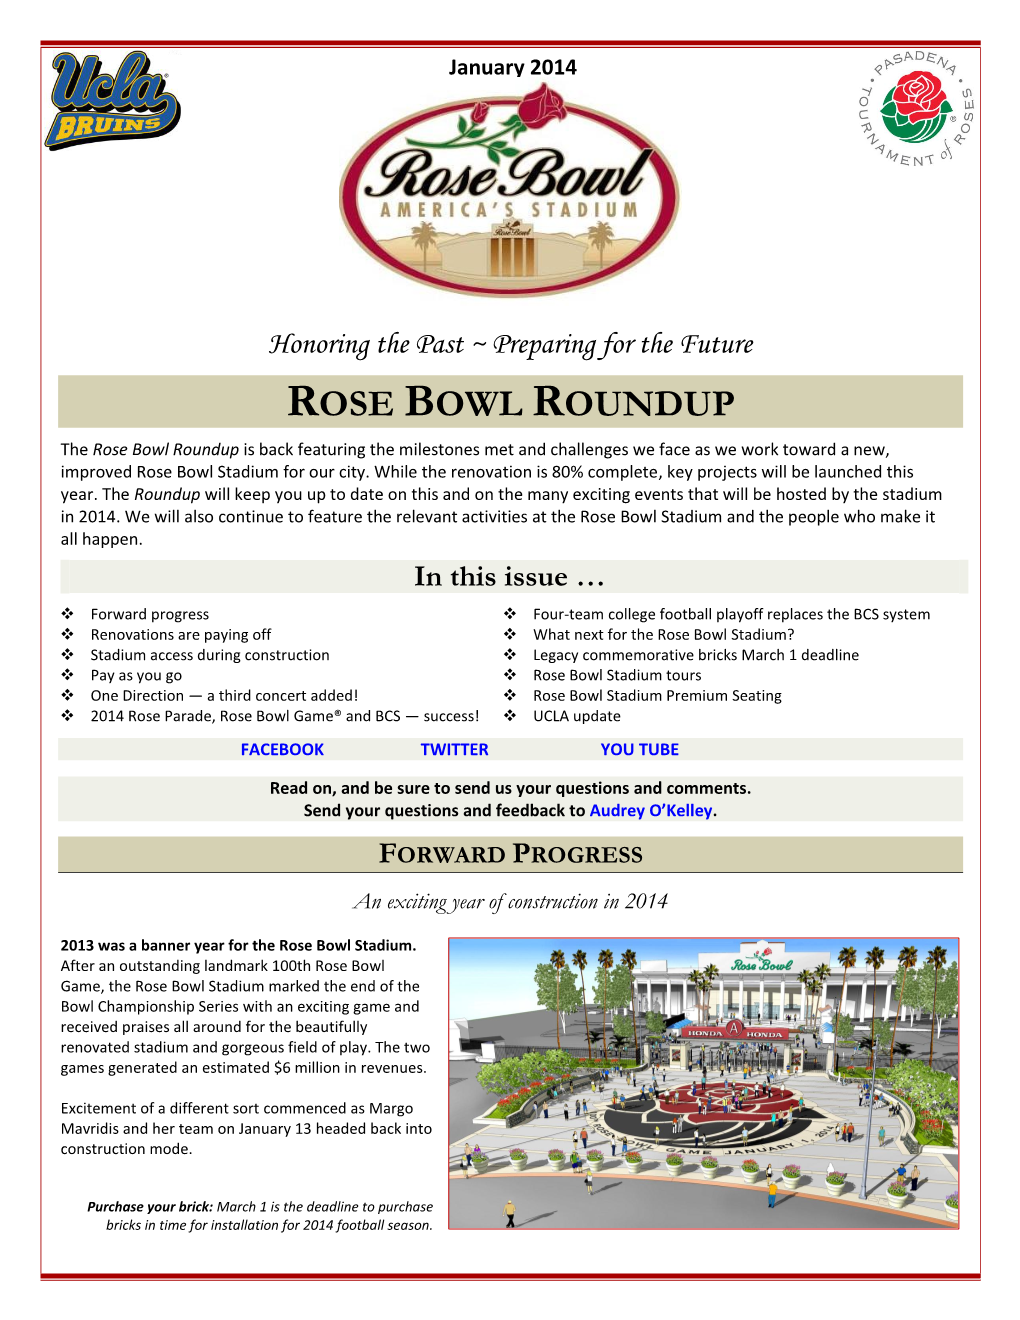 ROSE BOWL ROUNDUP the Rose Bowl Roundup Is Back Featuring the Milestones Met and Challenges We Face As We Work Toward a New, Improved Rose Bowl Stadium for Our City